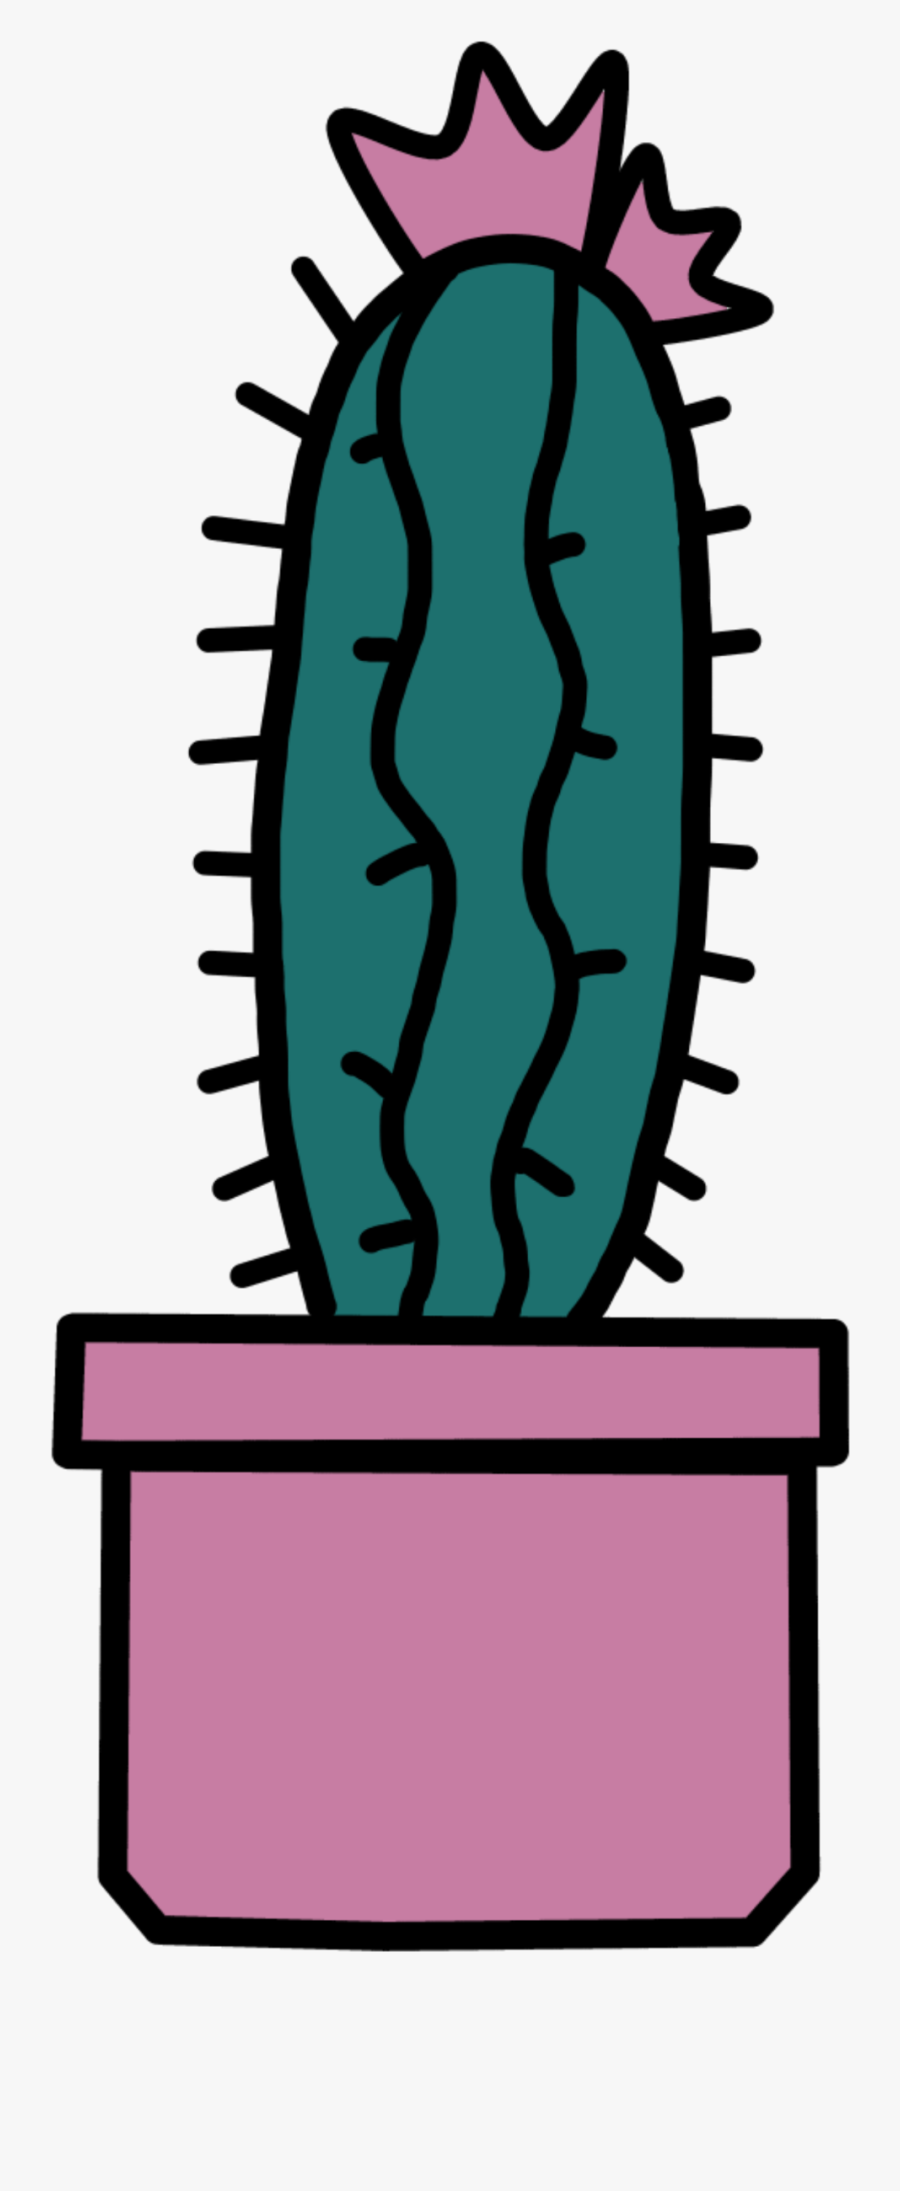 #cactus #draw #cute #pink #green #freetoedit #ftestickers - Prickly Pear, Transparent Clipart